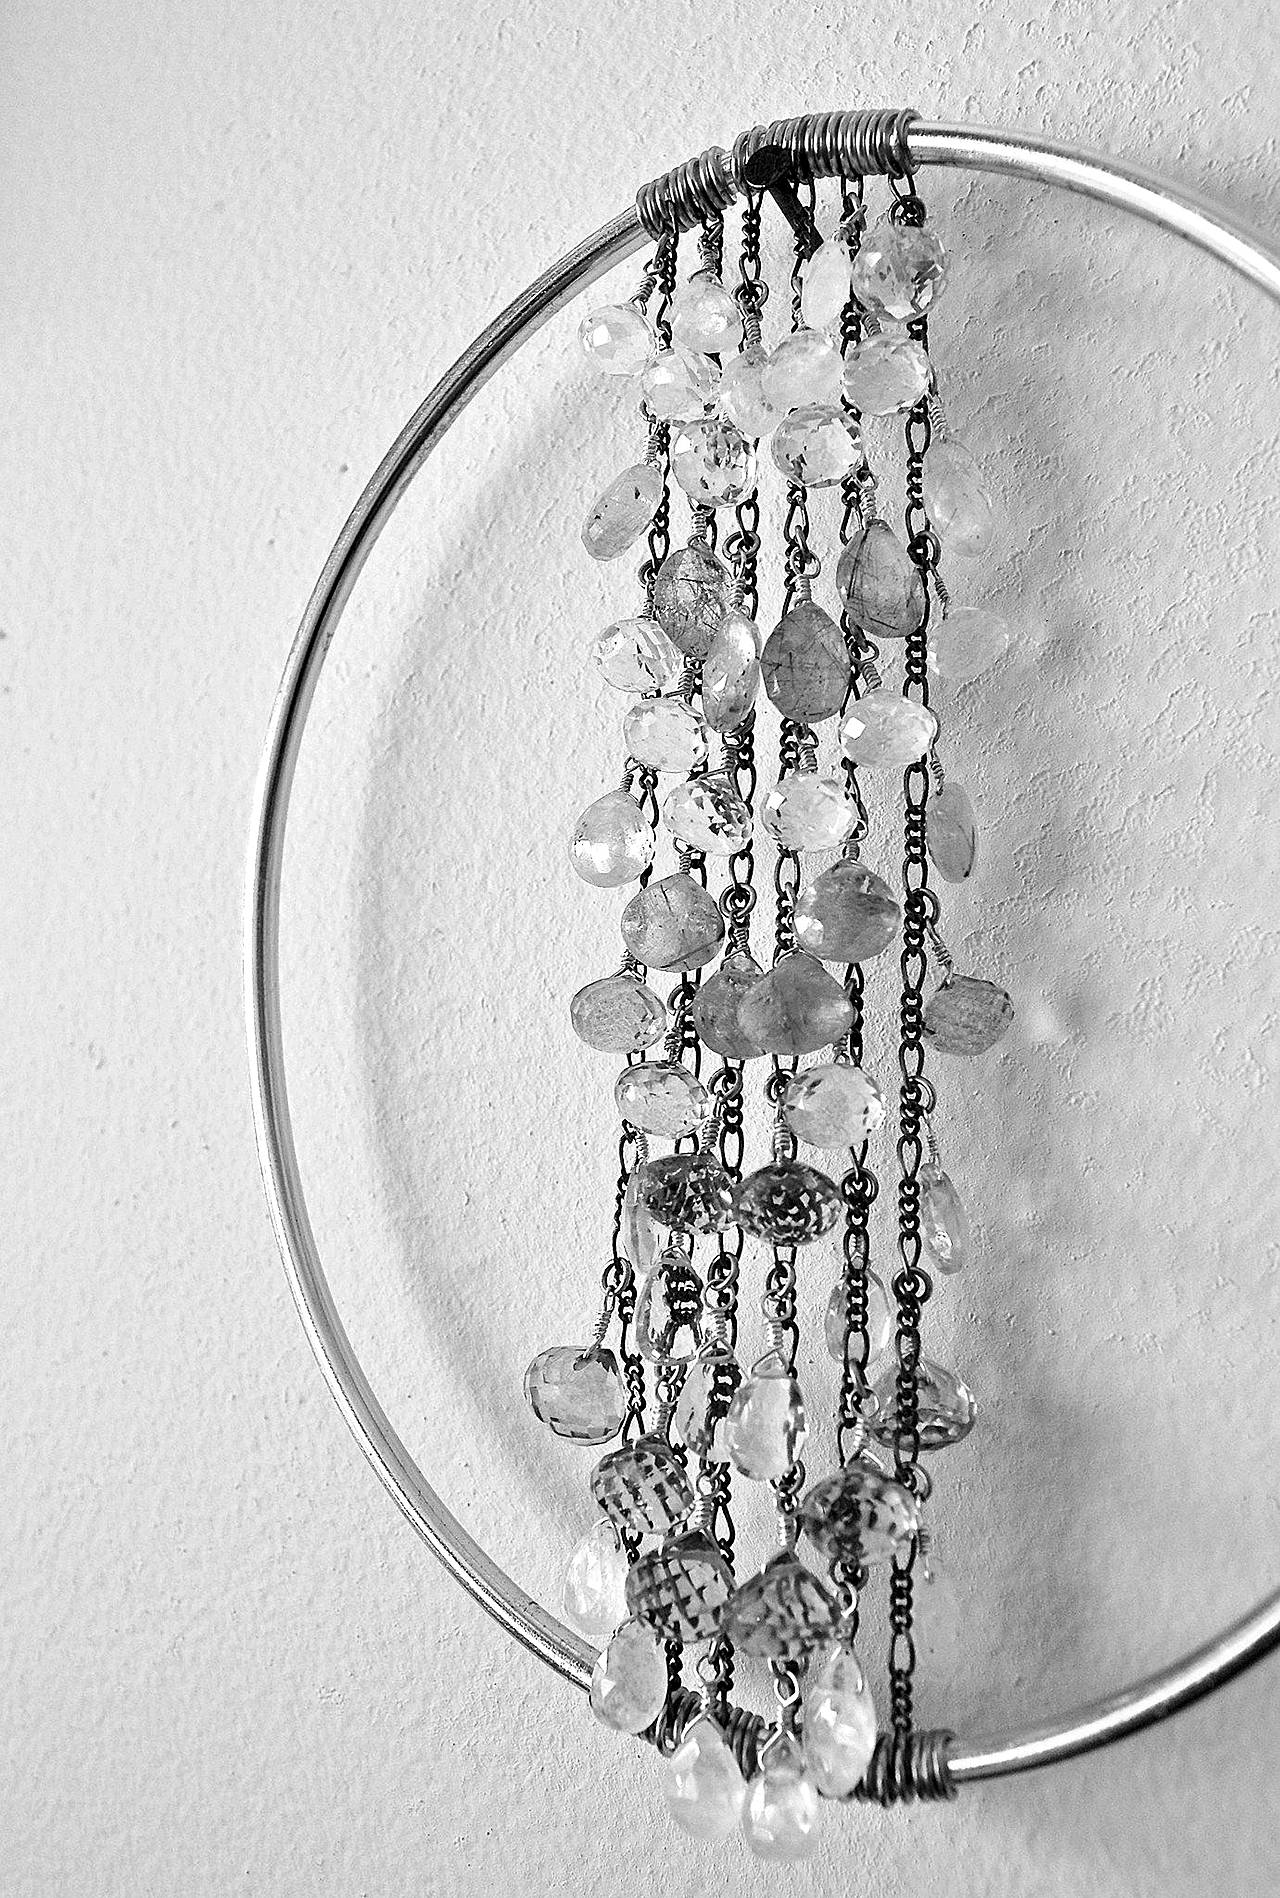 Alexa Allamano photo                                Allamano makes home decor in addition to jewelry. In this piece, 52 gemstones are tethered to vertical chains and suspended in the center of a brass oval.